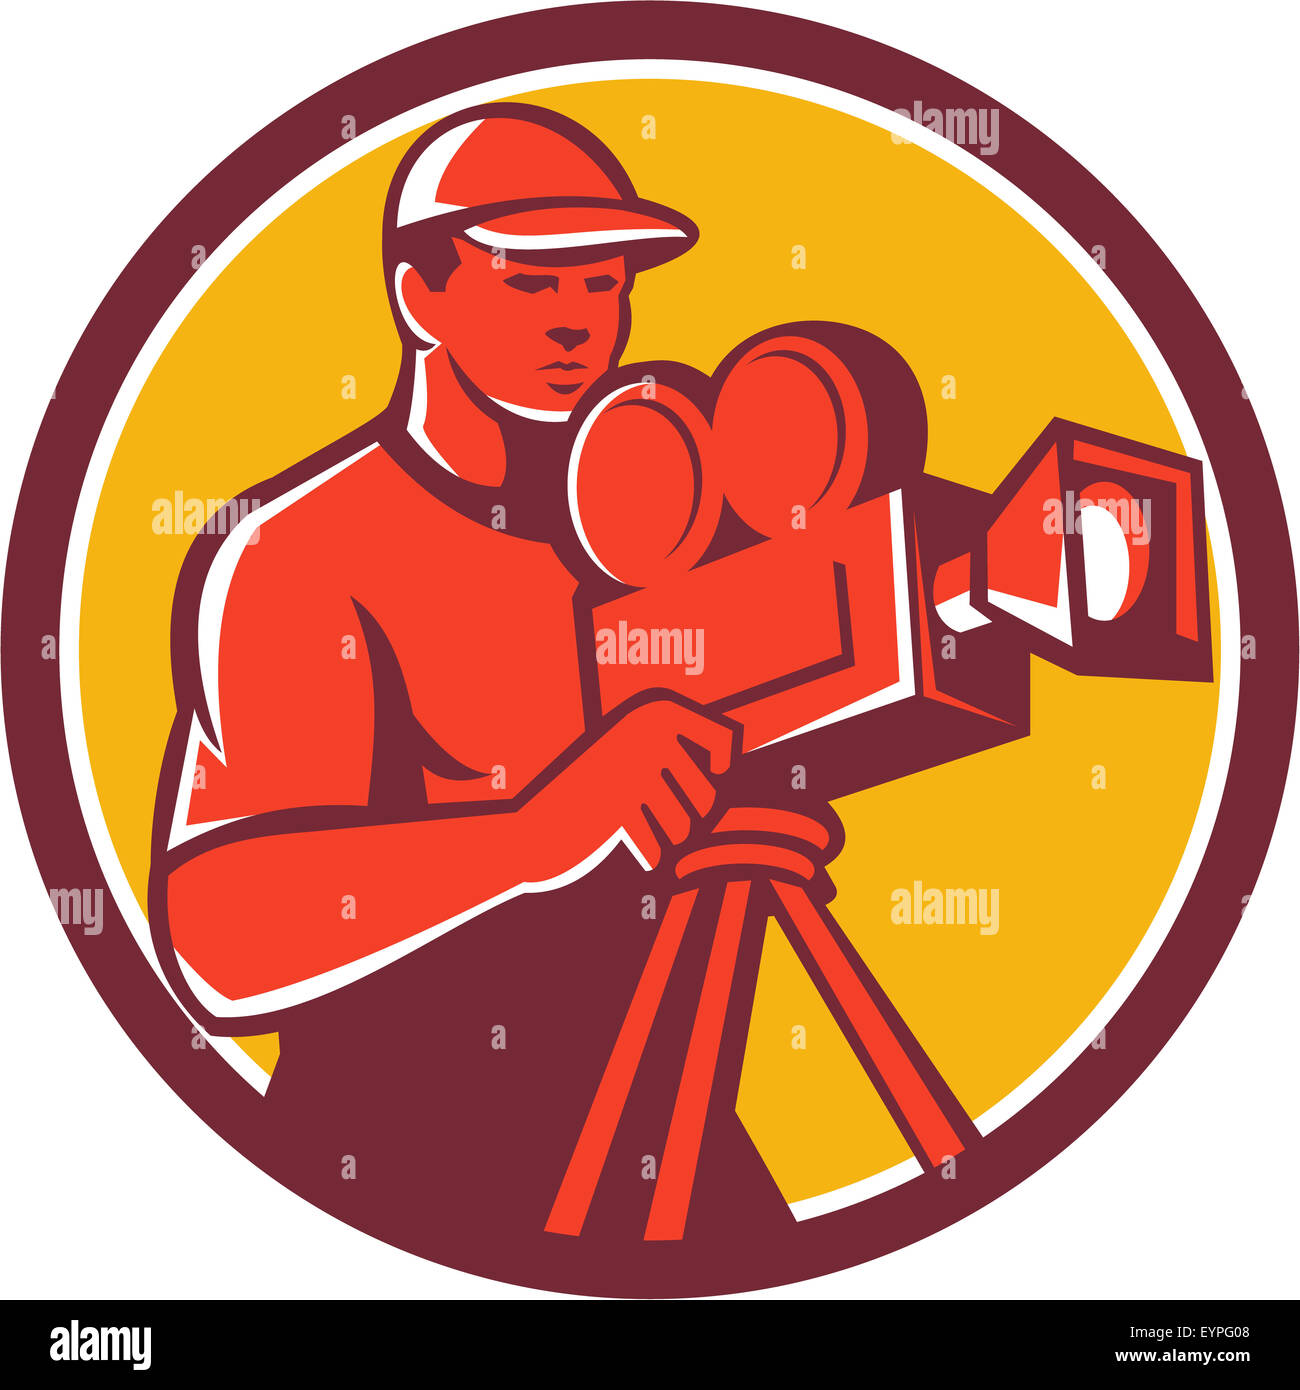 Illustration of a cameraman movie director with vintage movie film camera set inside circle on isolated background done in retro style. Stock Photo